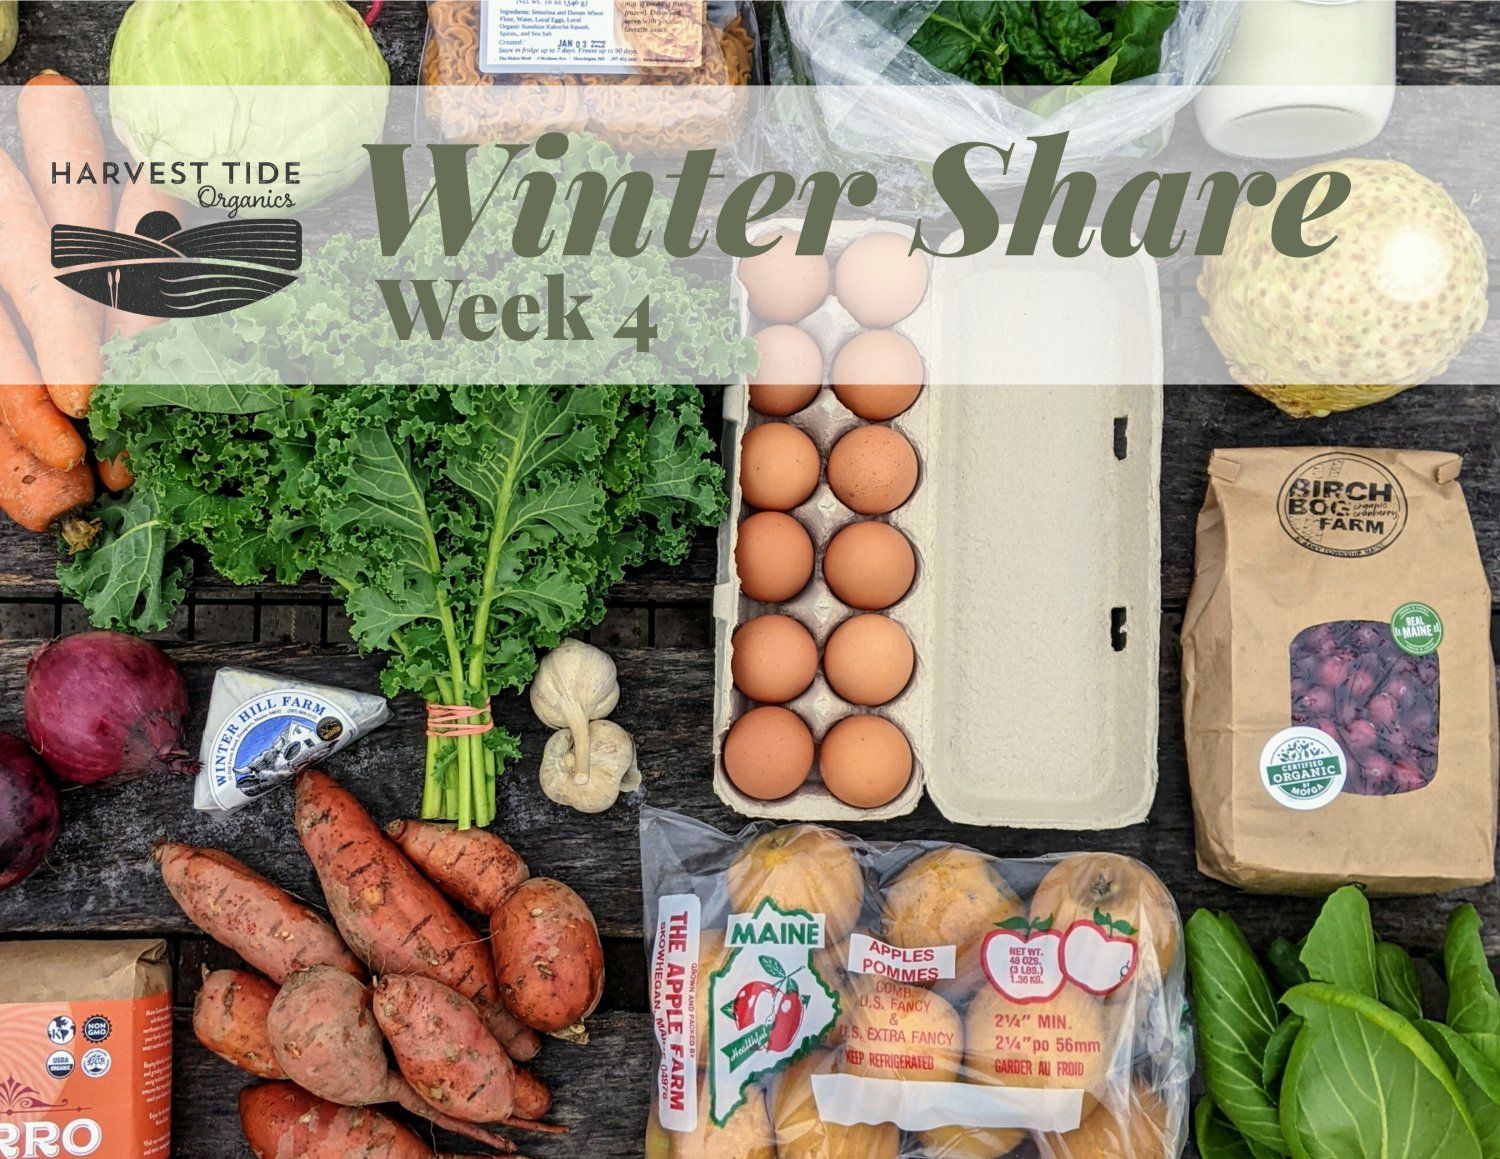 Previous Happening: Winter Harvest Share - Week 4